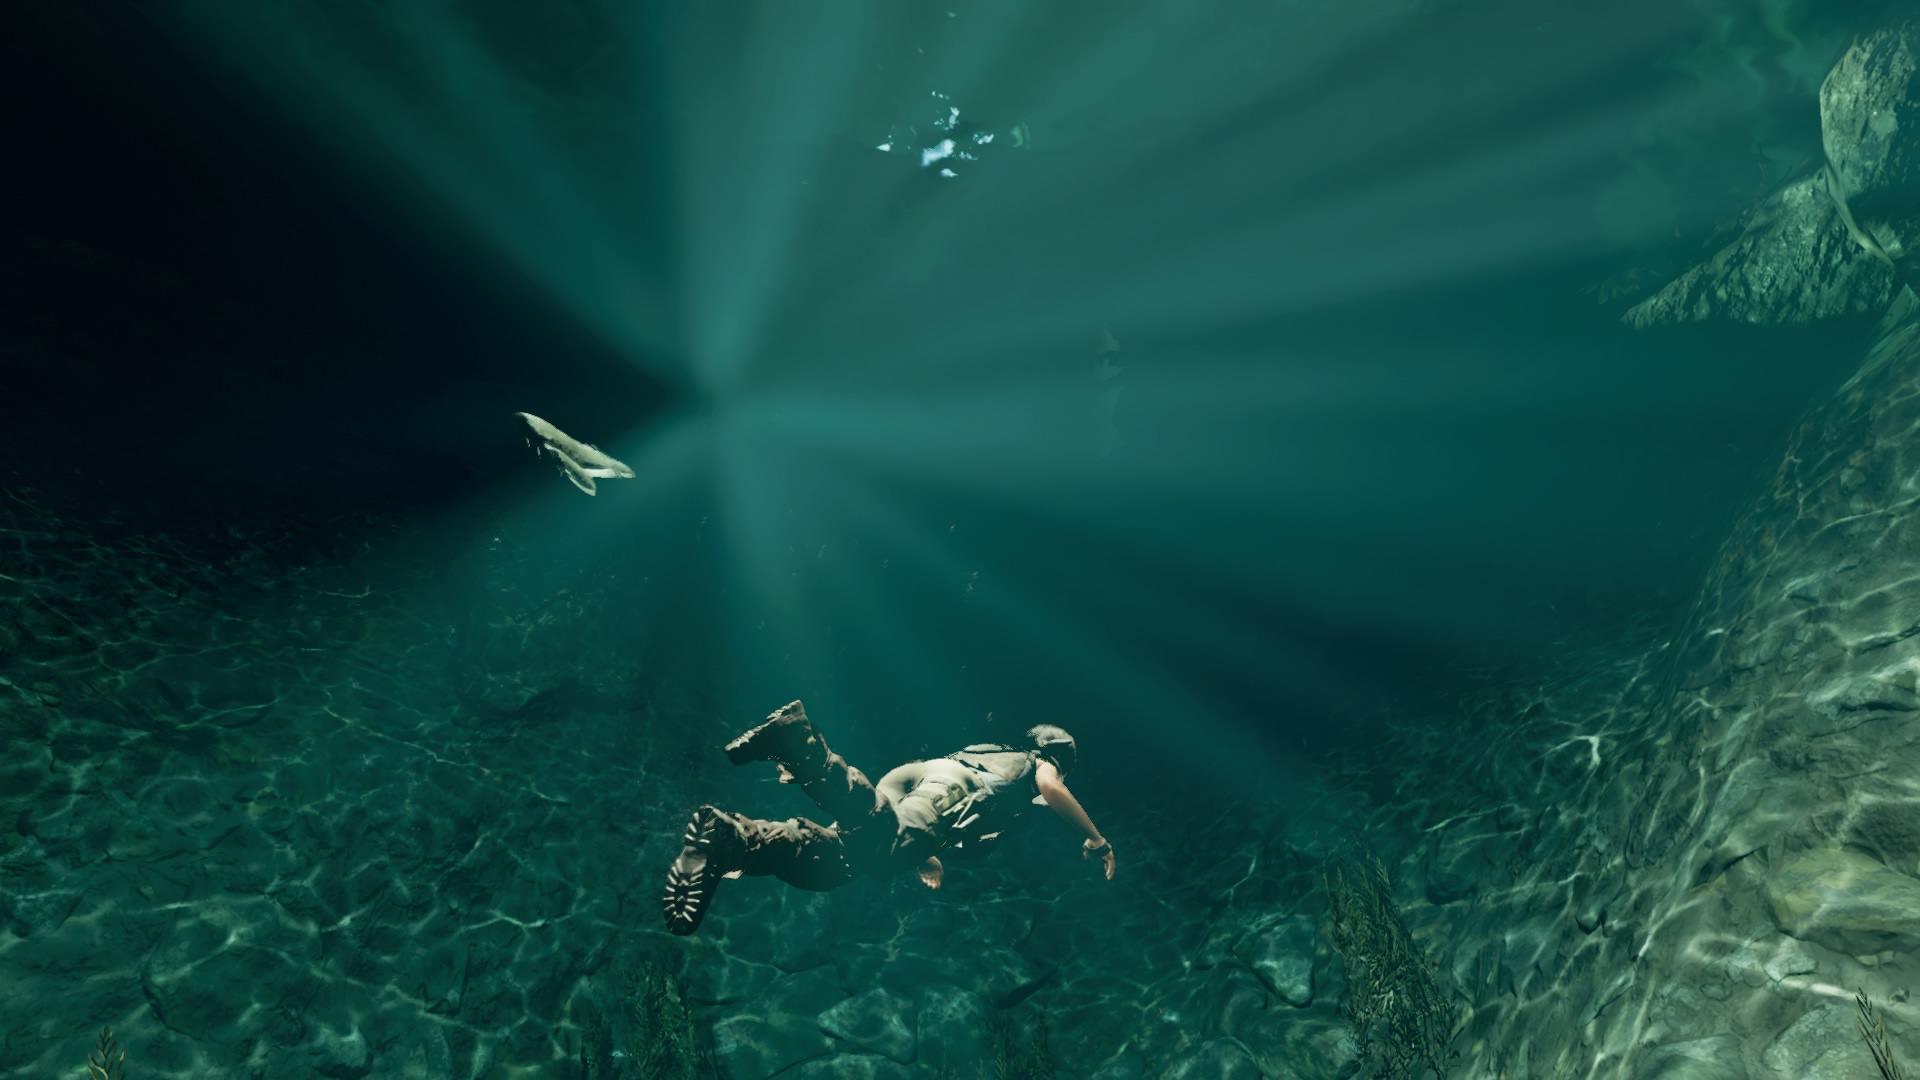 General 1920x1080 Shadow of the Tomb Raider PlayStation 4 video games screen shot underwater Lara Croft (Tomb Raider) video game characters Eidos Interactive Square Enix